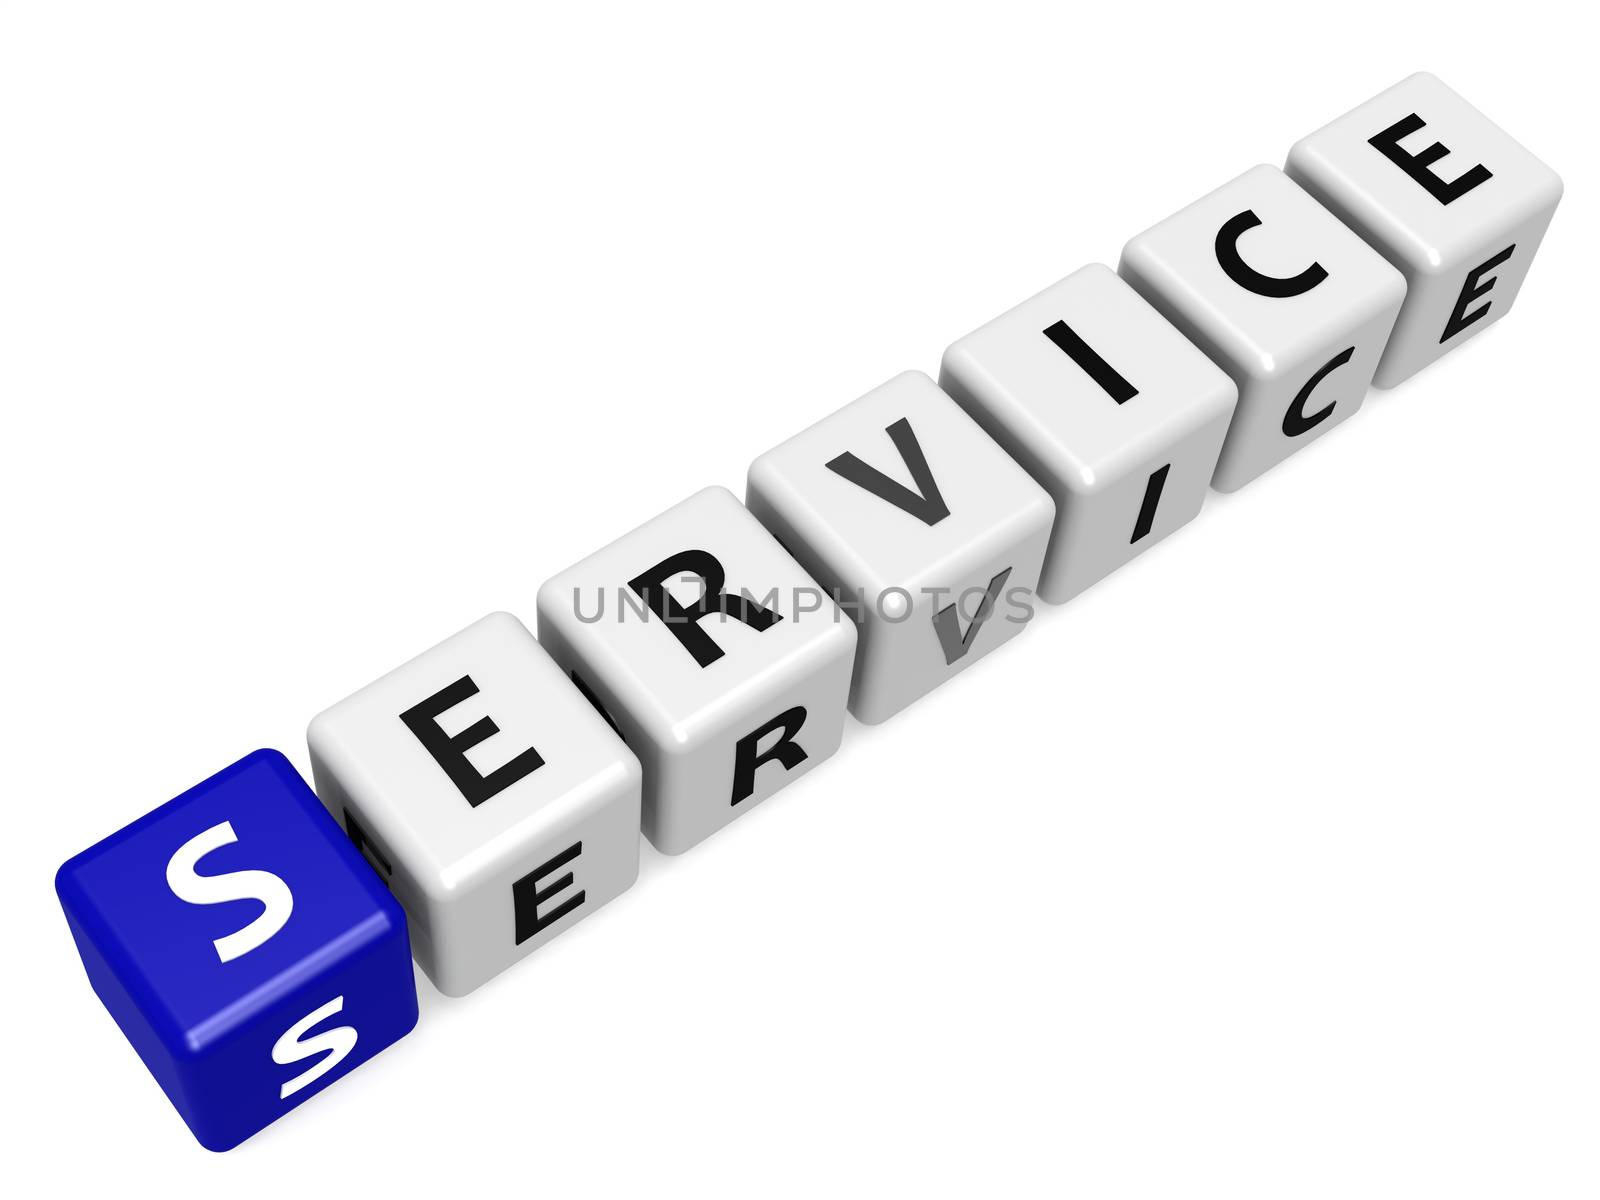 Service buzzword blue by tang90246